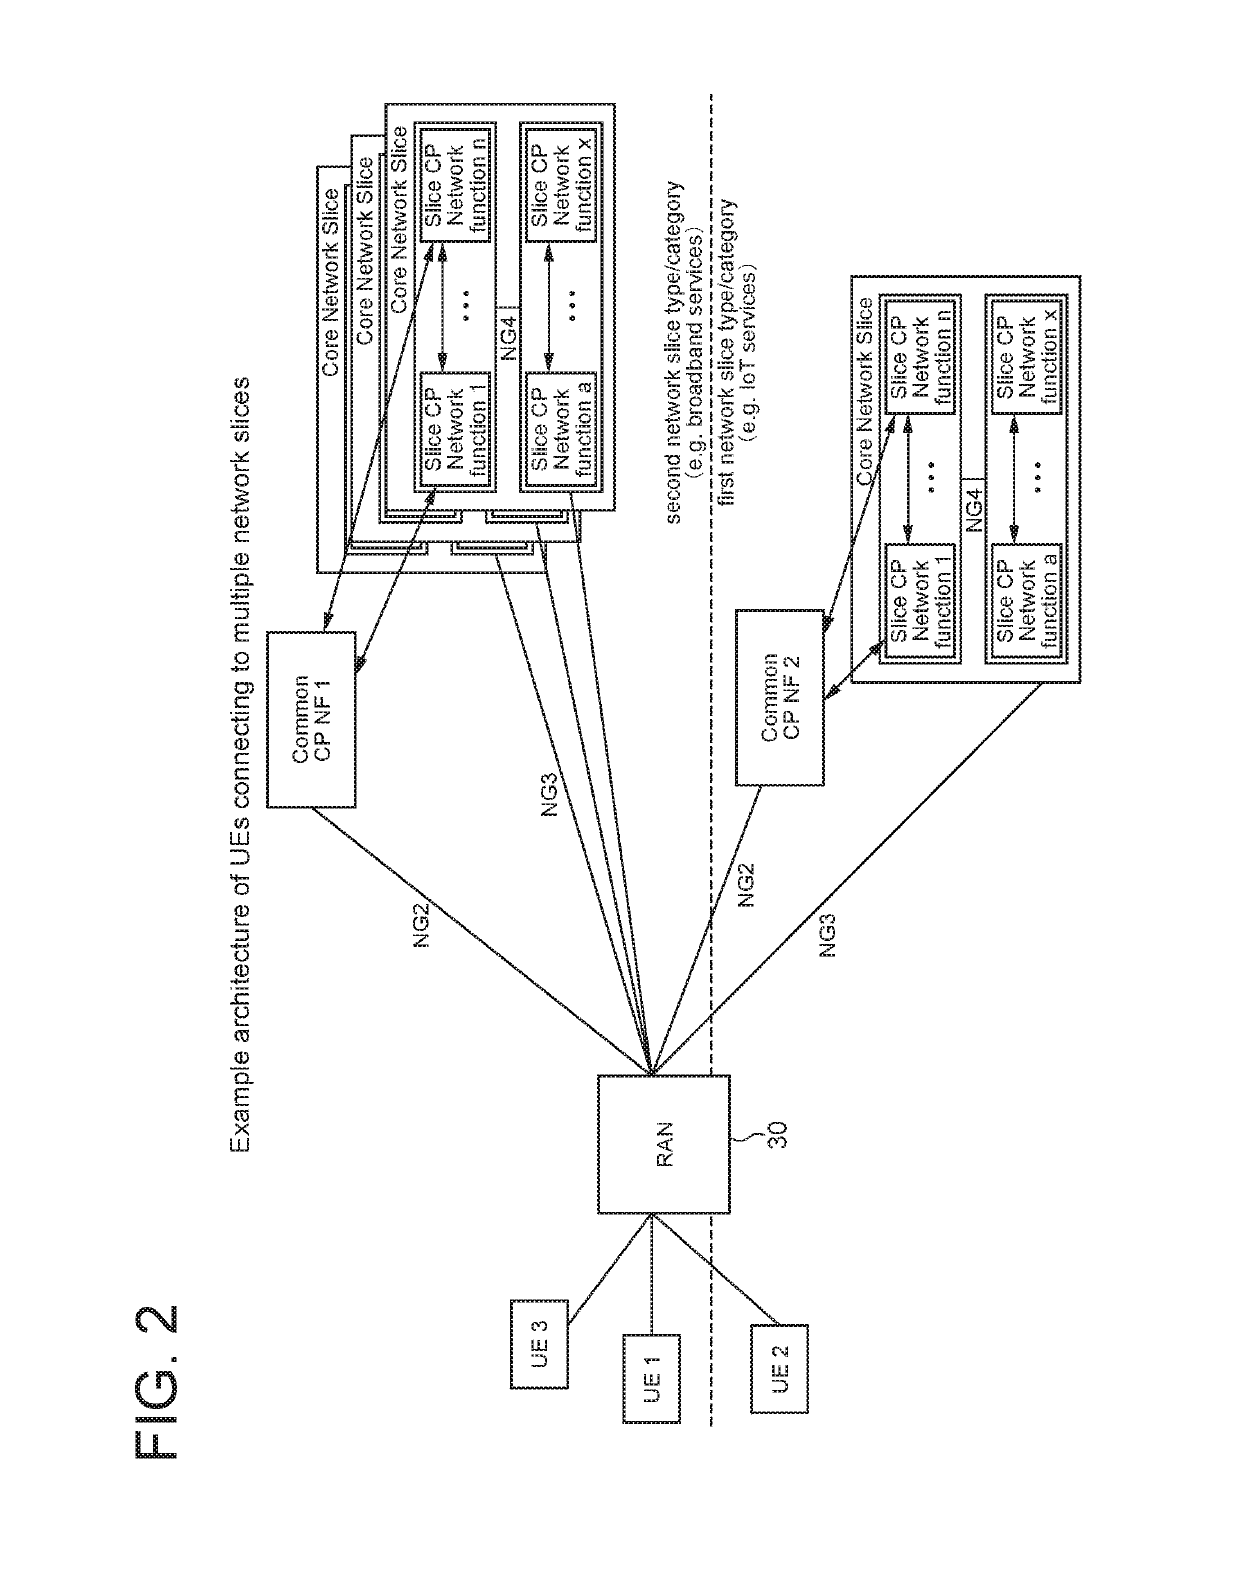 Method for user plane connection activation or deactivation per session